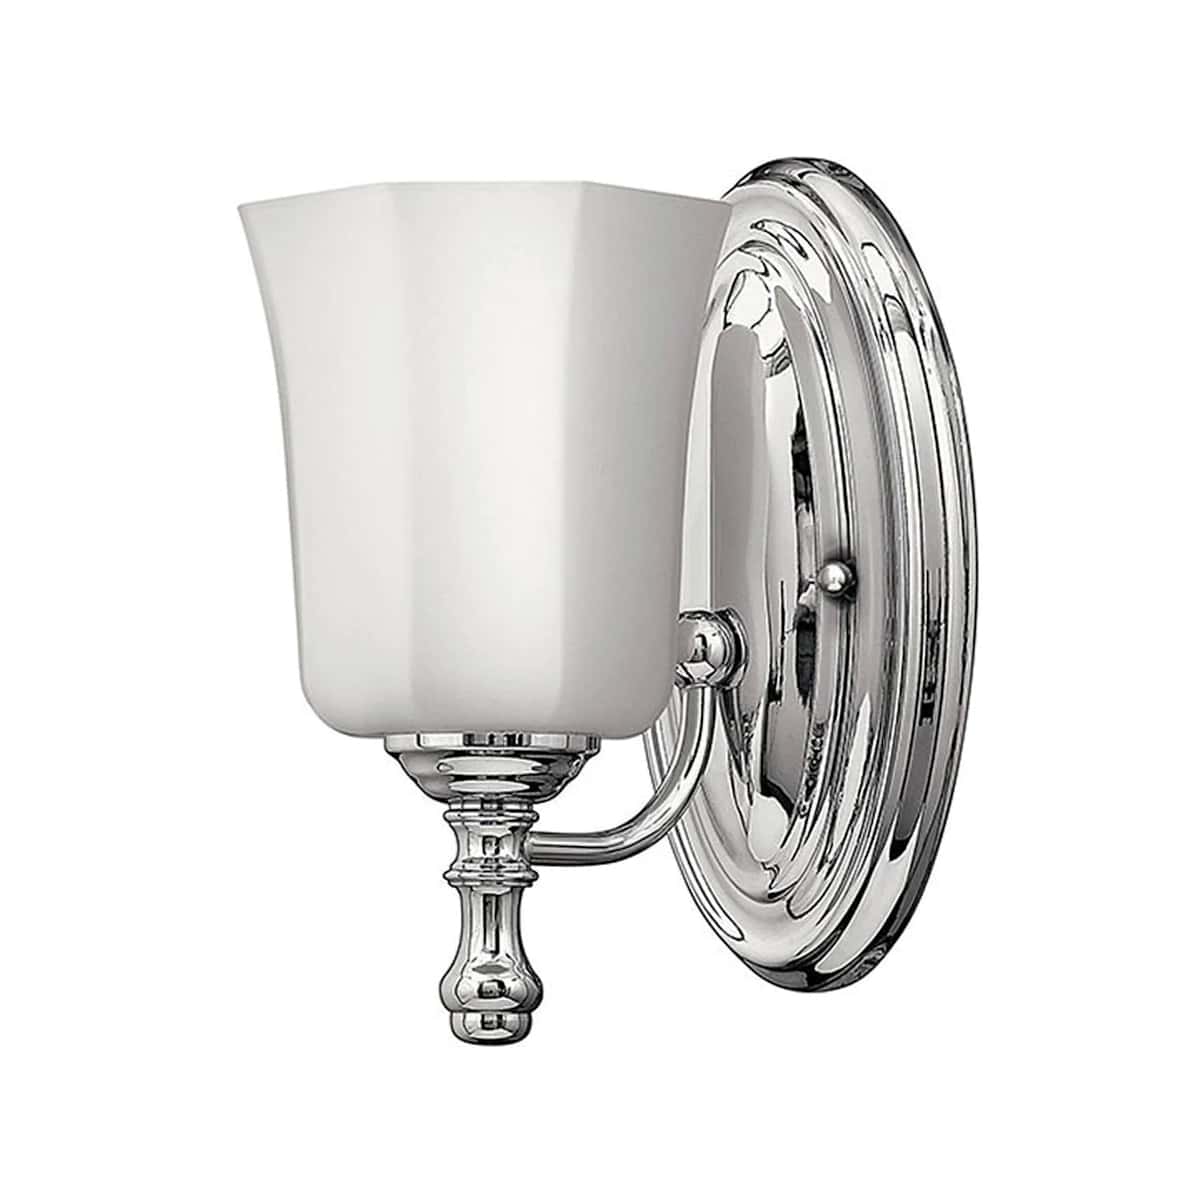 Product image of Hinkley Shelly Chrome Vanity Wall Light